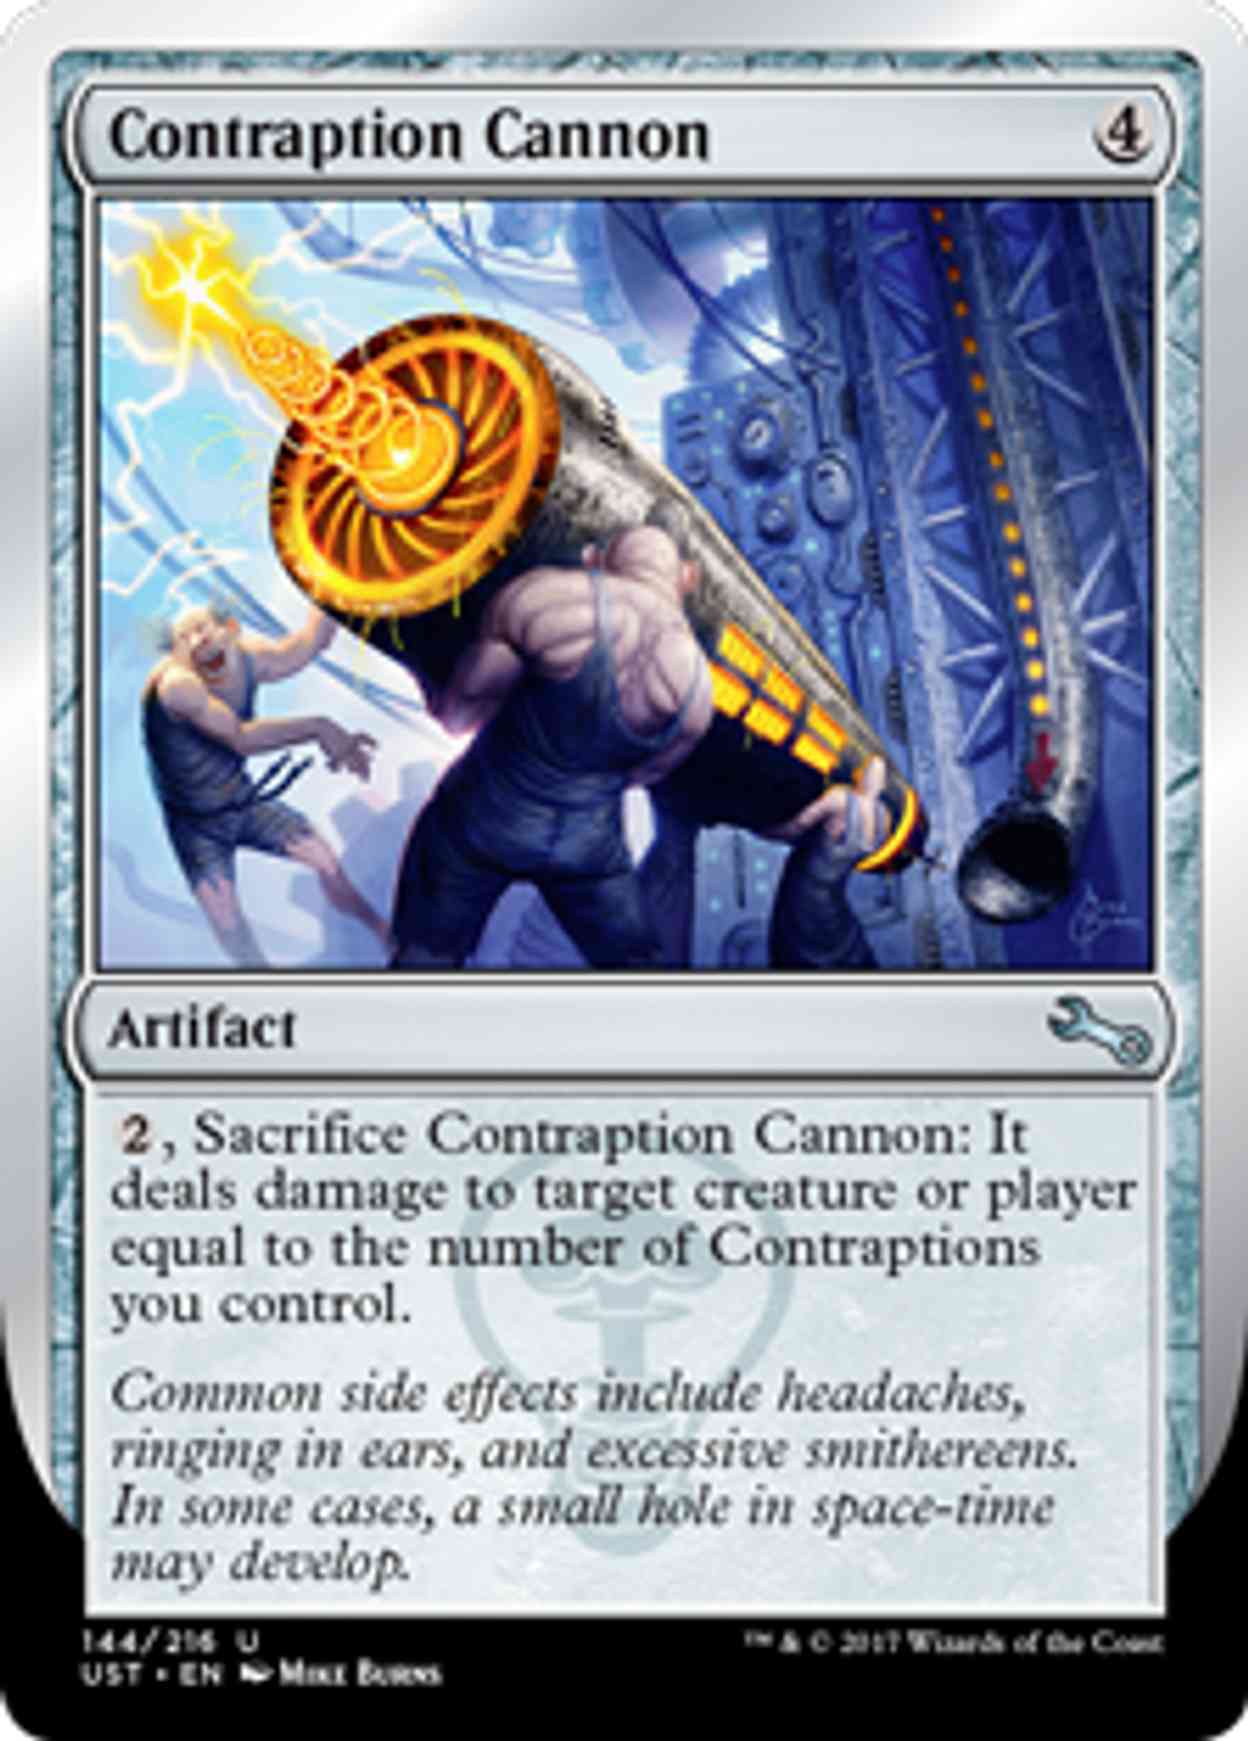 Contraption Cannon magic card front